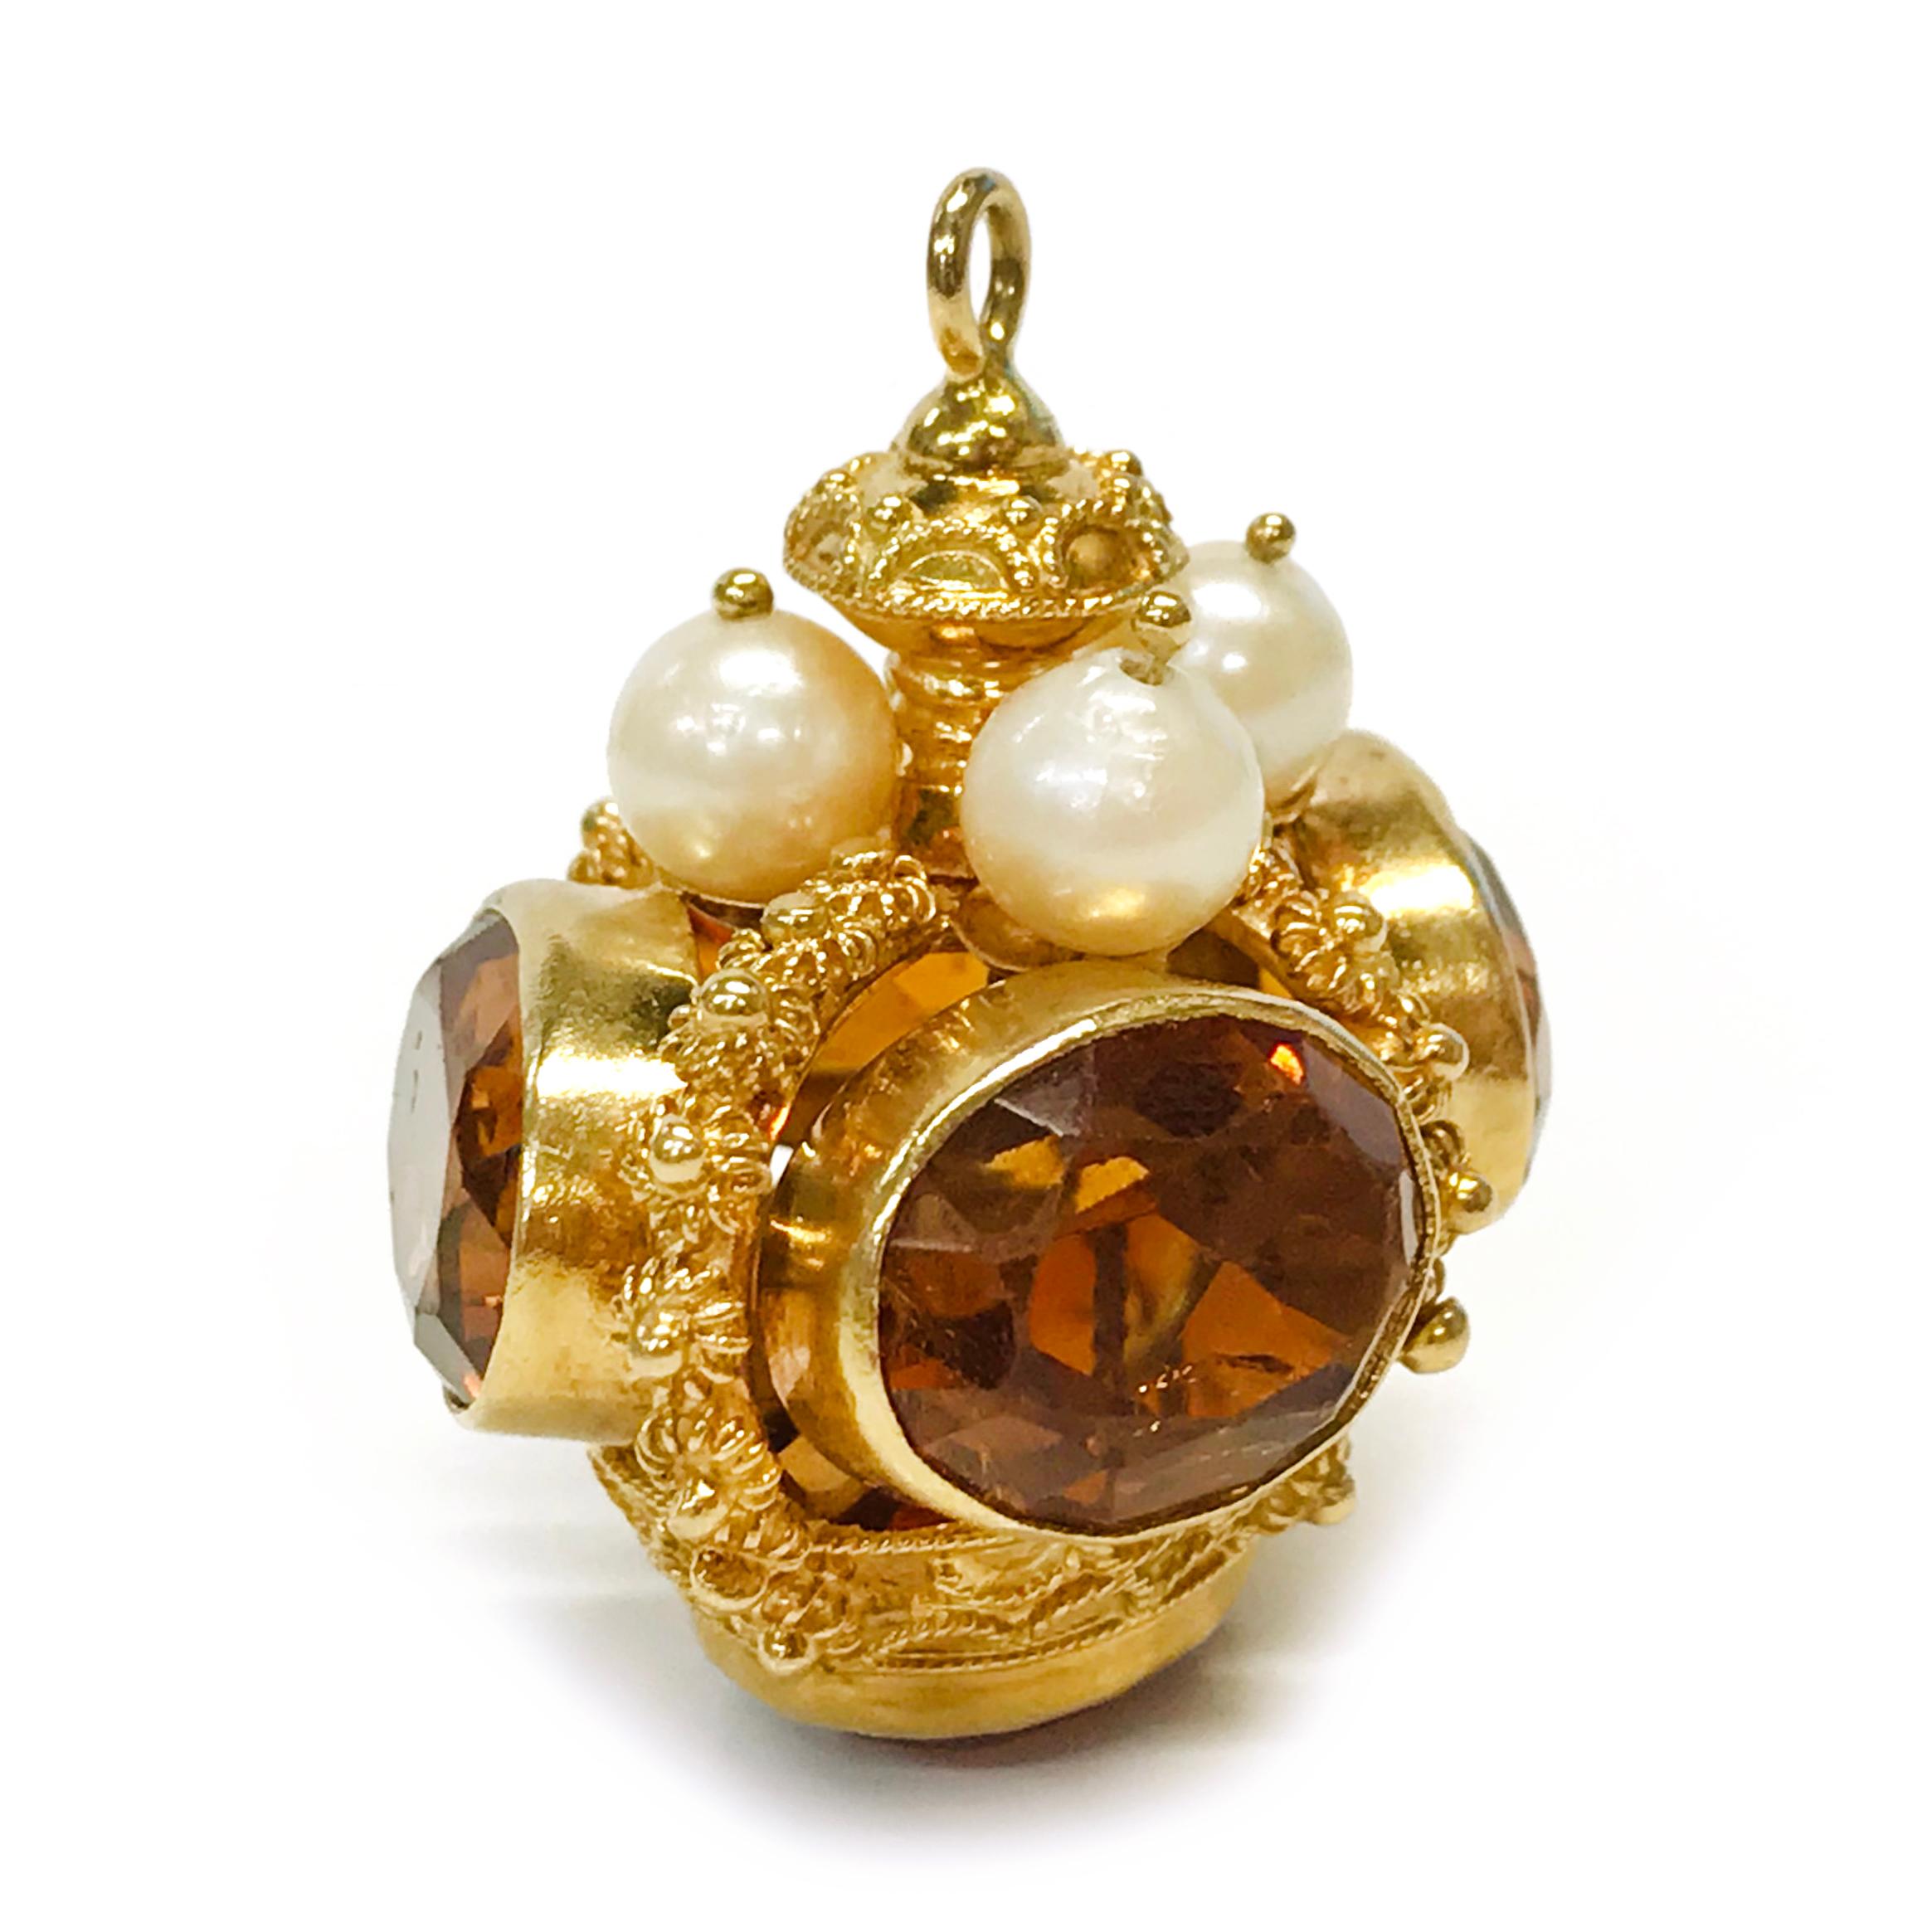 14 Karat Citrine Pearl Crown Pendant. This glorious crown pendant has lovely gold detail and features five oval-cut citrines bezel-set around the crown and at the bottom. The crown measures 32.67mm wide by 35.45mm tall. On the top of the crown under